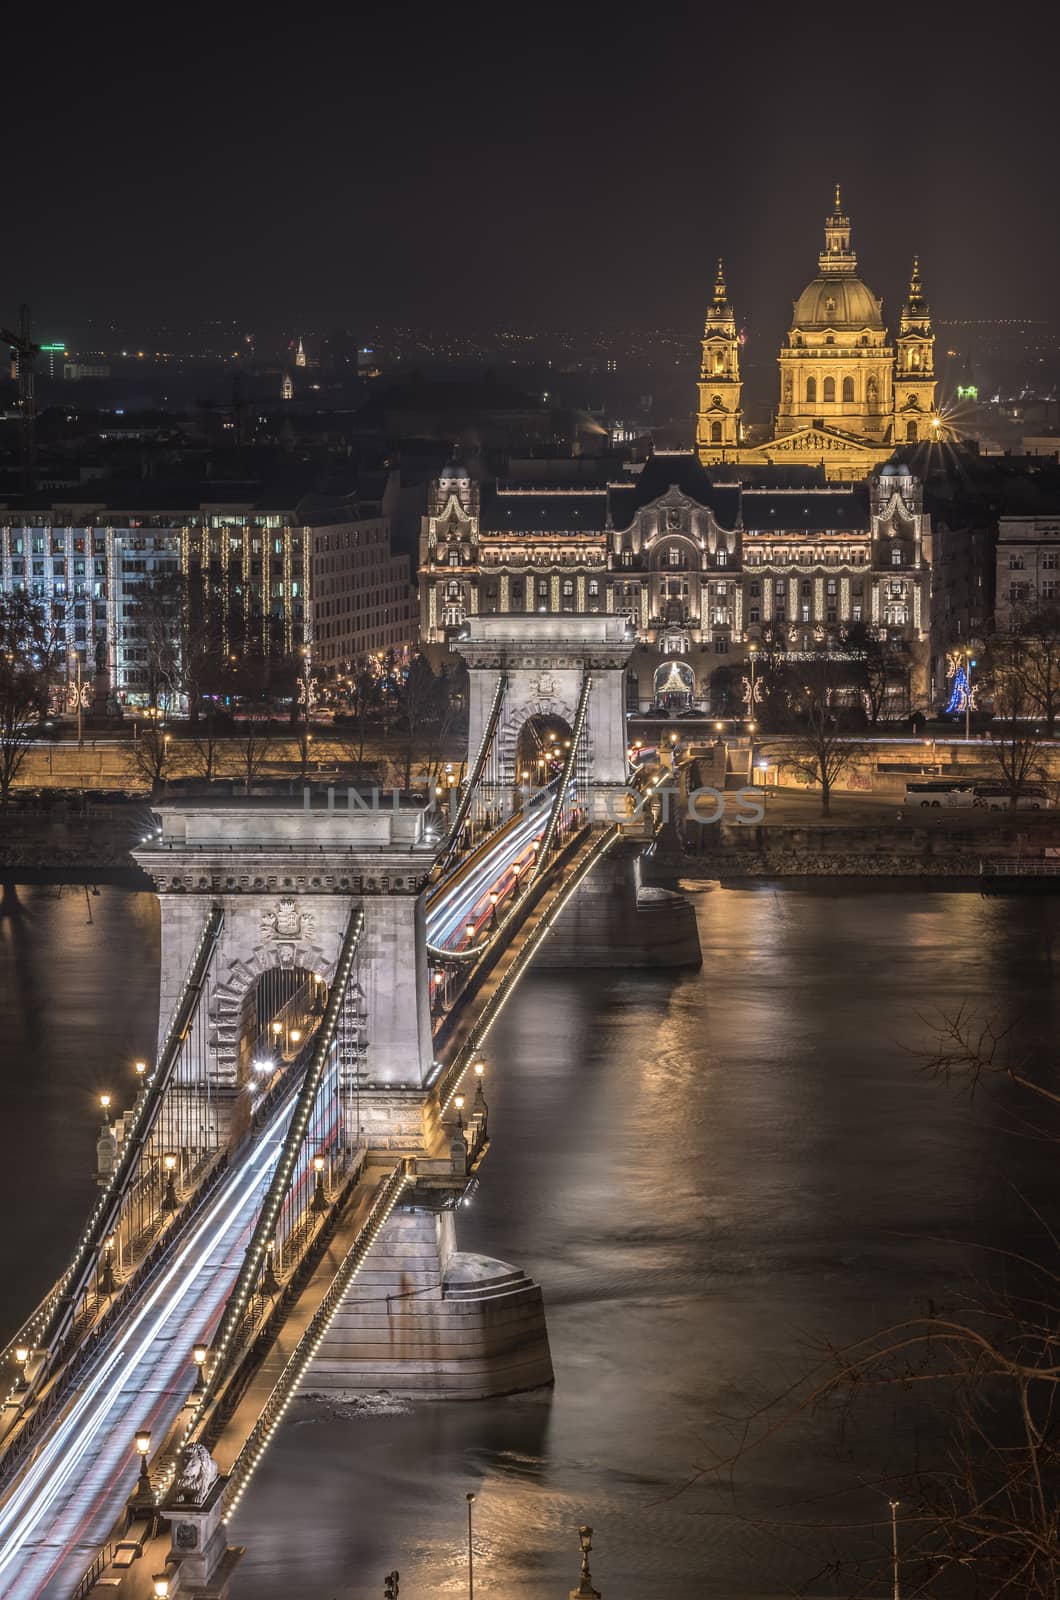 Night View of Chain Bridge over Danube River and St. Stephen's Basilica in Budapest, Hungary. As Seen from Royal Palace in Buda Castle.